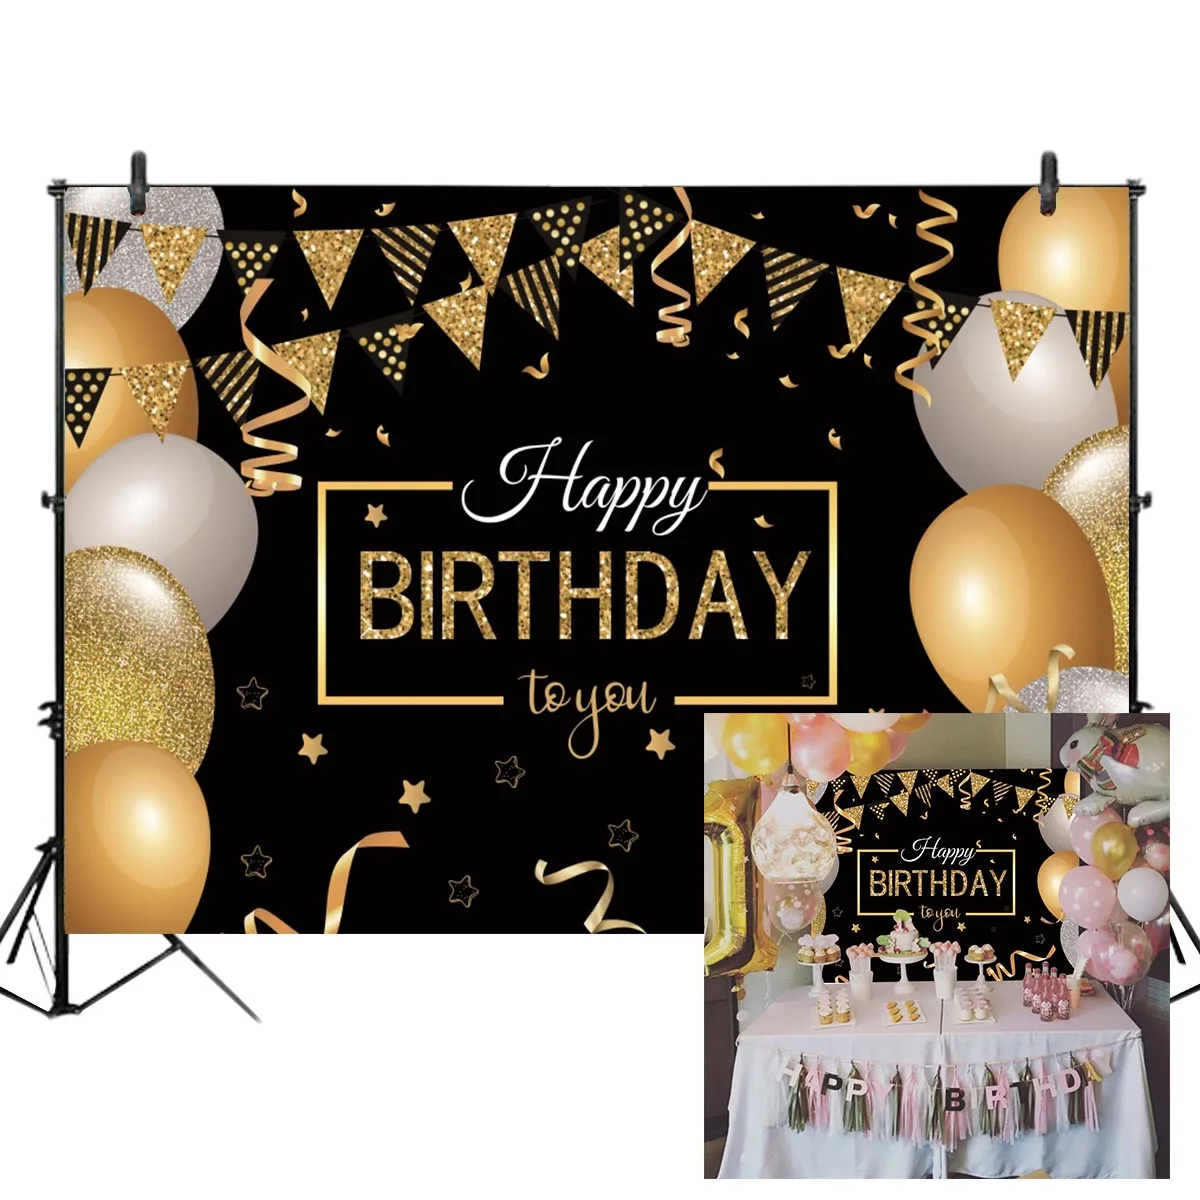 Fabric Birthday Sign Poster Banner for Birthday Party 5.9*3.28 Feet HOWAF Extra Large Happy Birthday Banner for Birthday Party Decorations Black and Gold Birthday Photo Booth Backdrop Background 